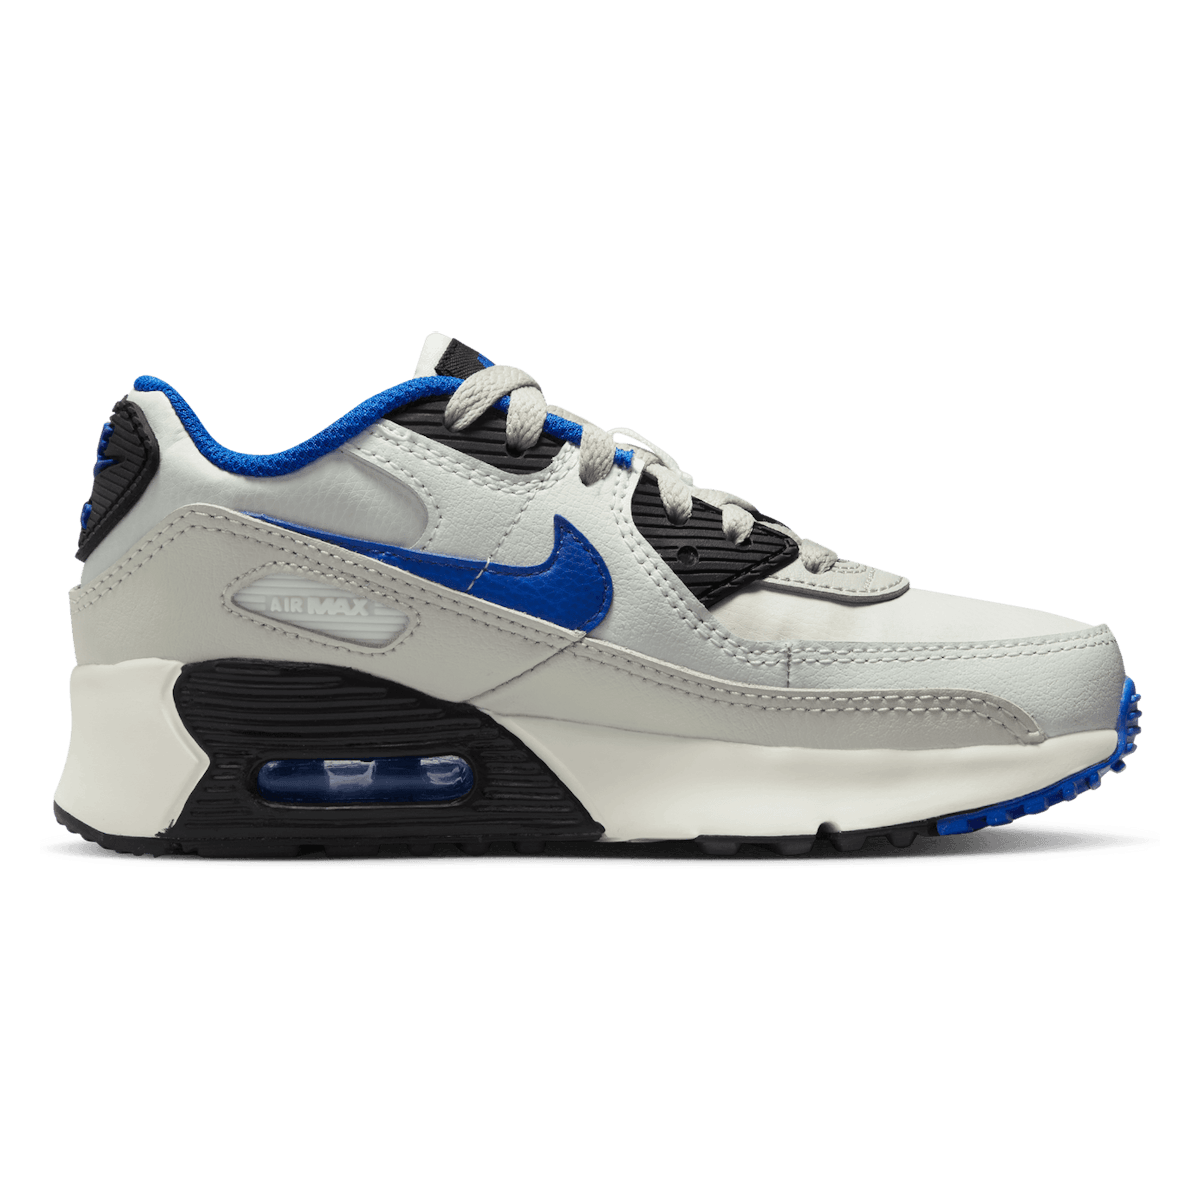 Nike Air Max 90 LTR PS "Racer Blue"